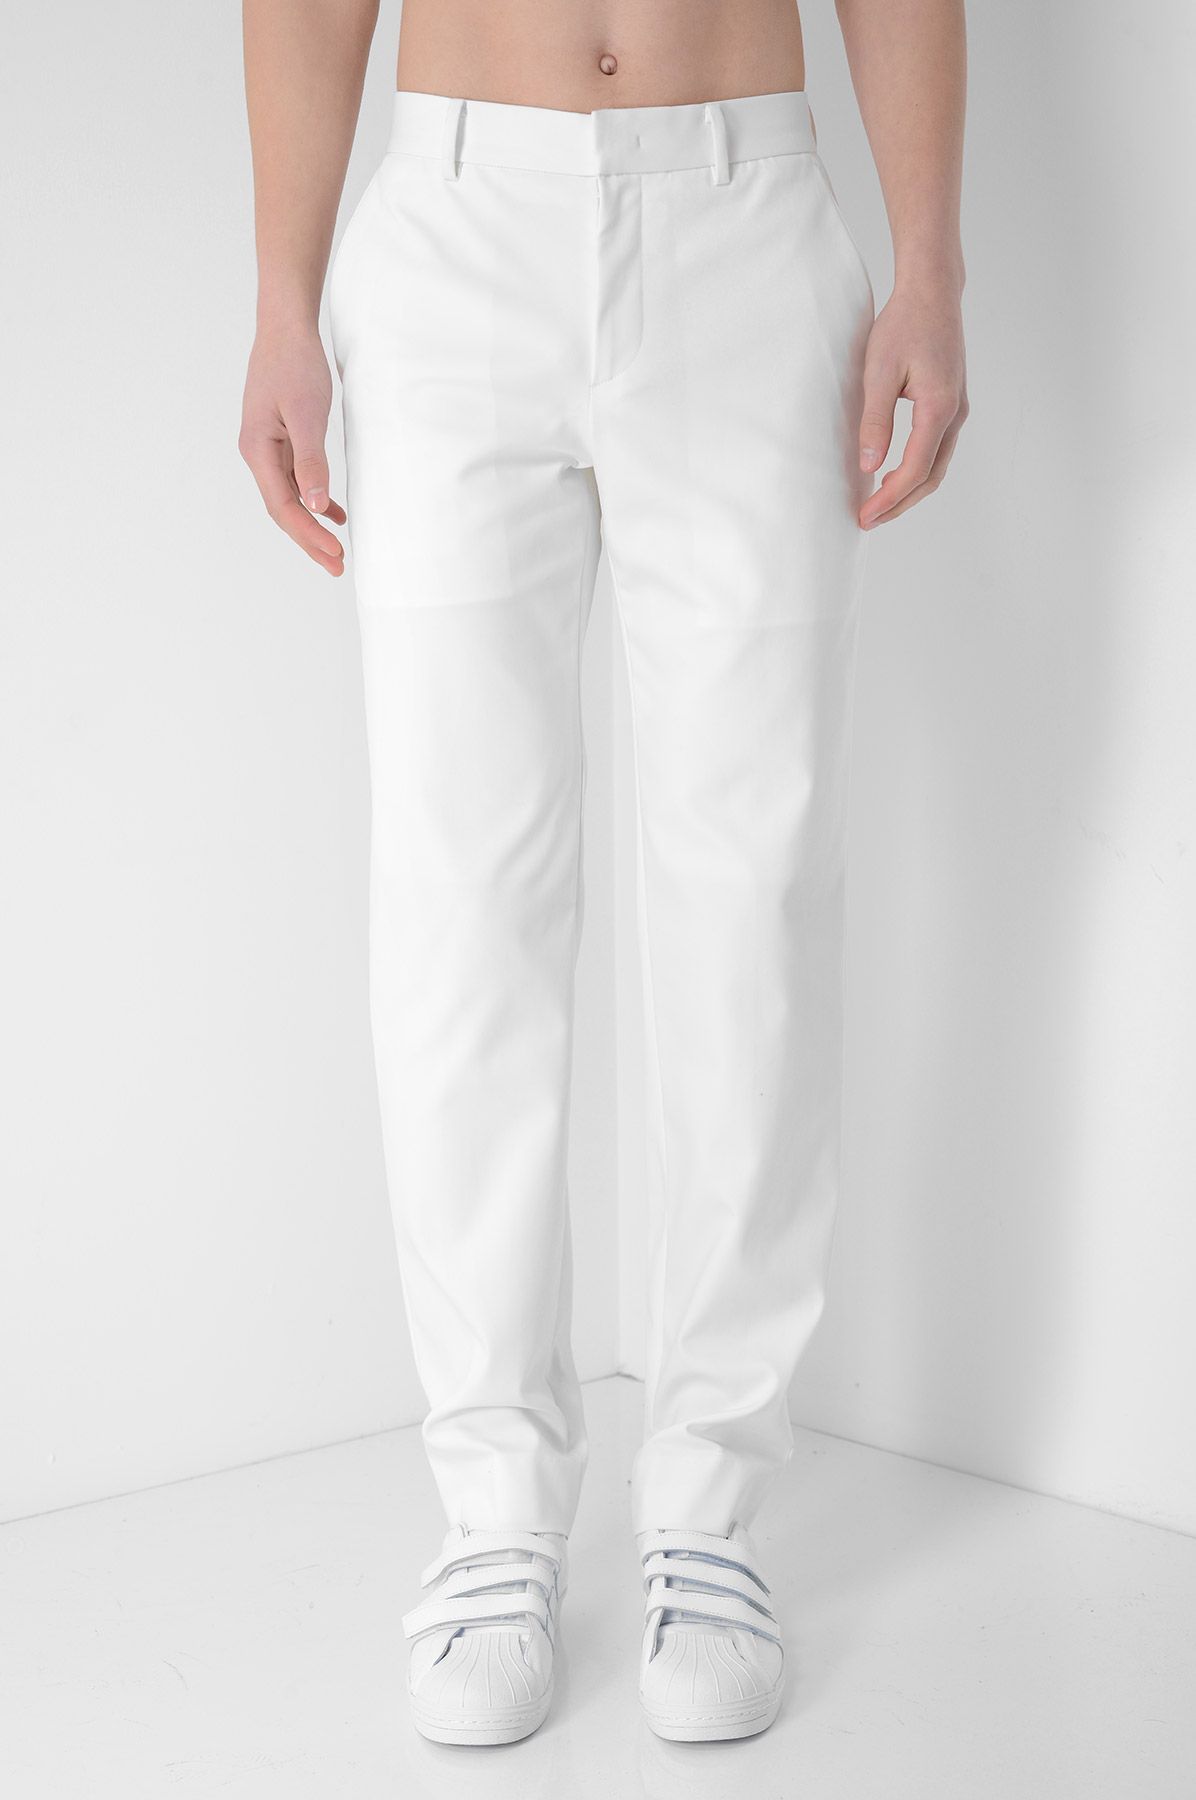 New Pick :JUUN.Jj Slim Fit White Trousers. See moret Here: